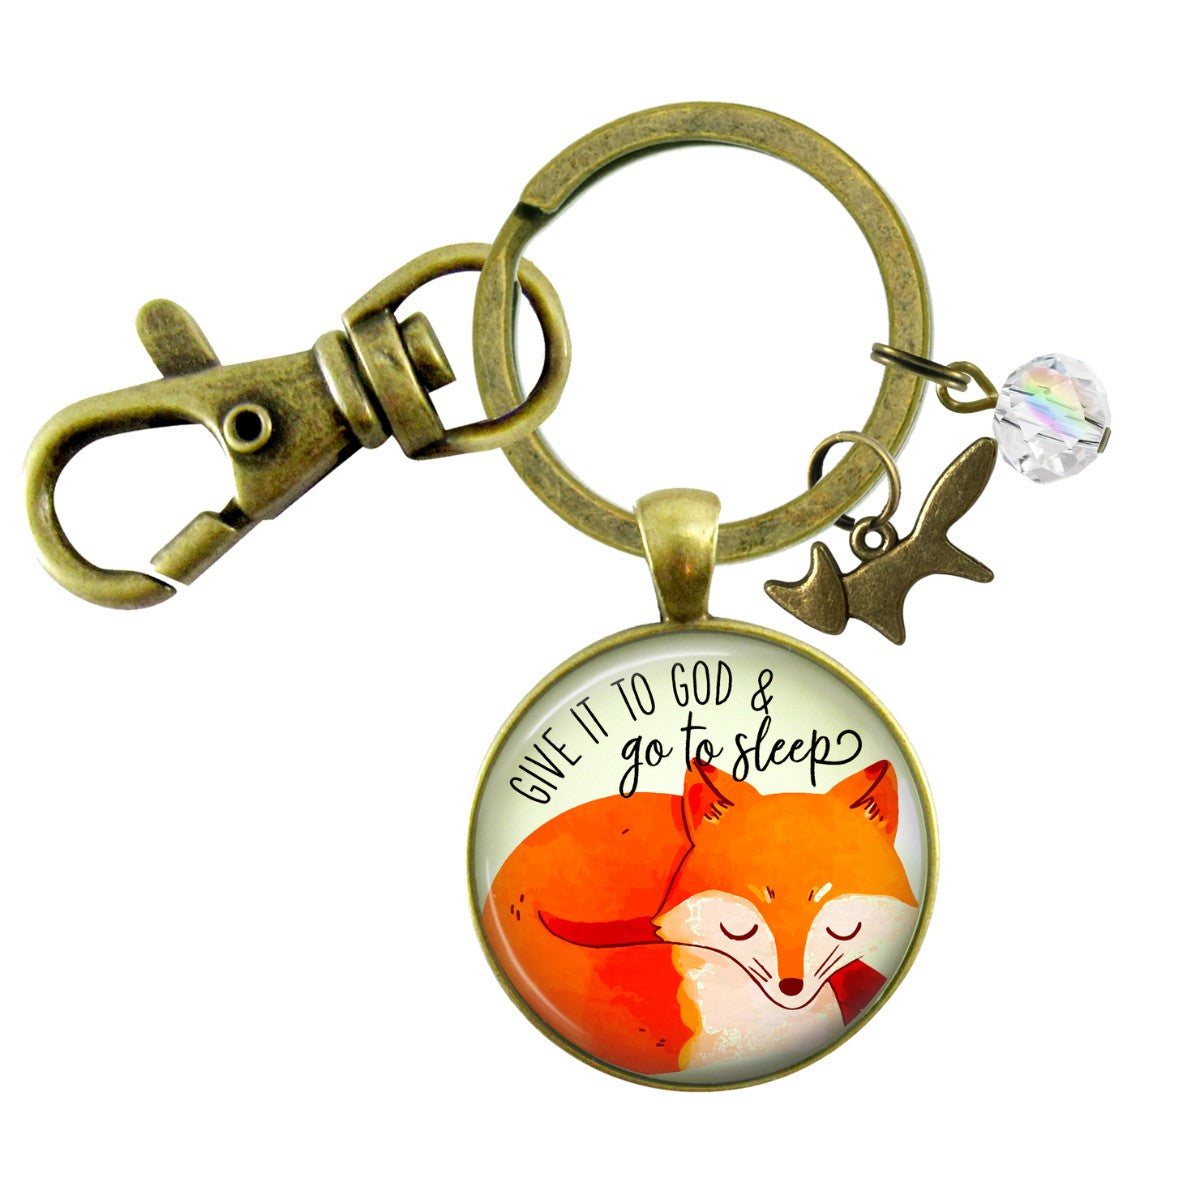 Fox Keychain Give It To God And Go To Sleep Cute Surrender Theme Quote Illustrated Pendant Faith Jewelry For Women  Keychain - Women - Gutsy Goodness Handmade Jewelry